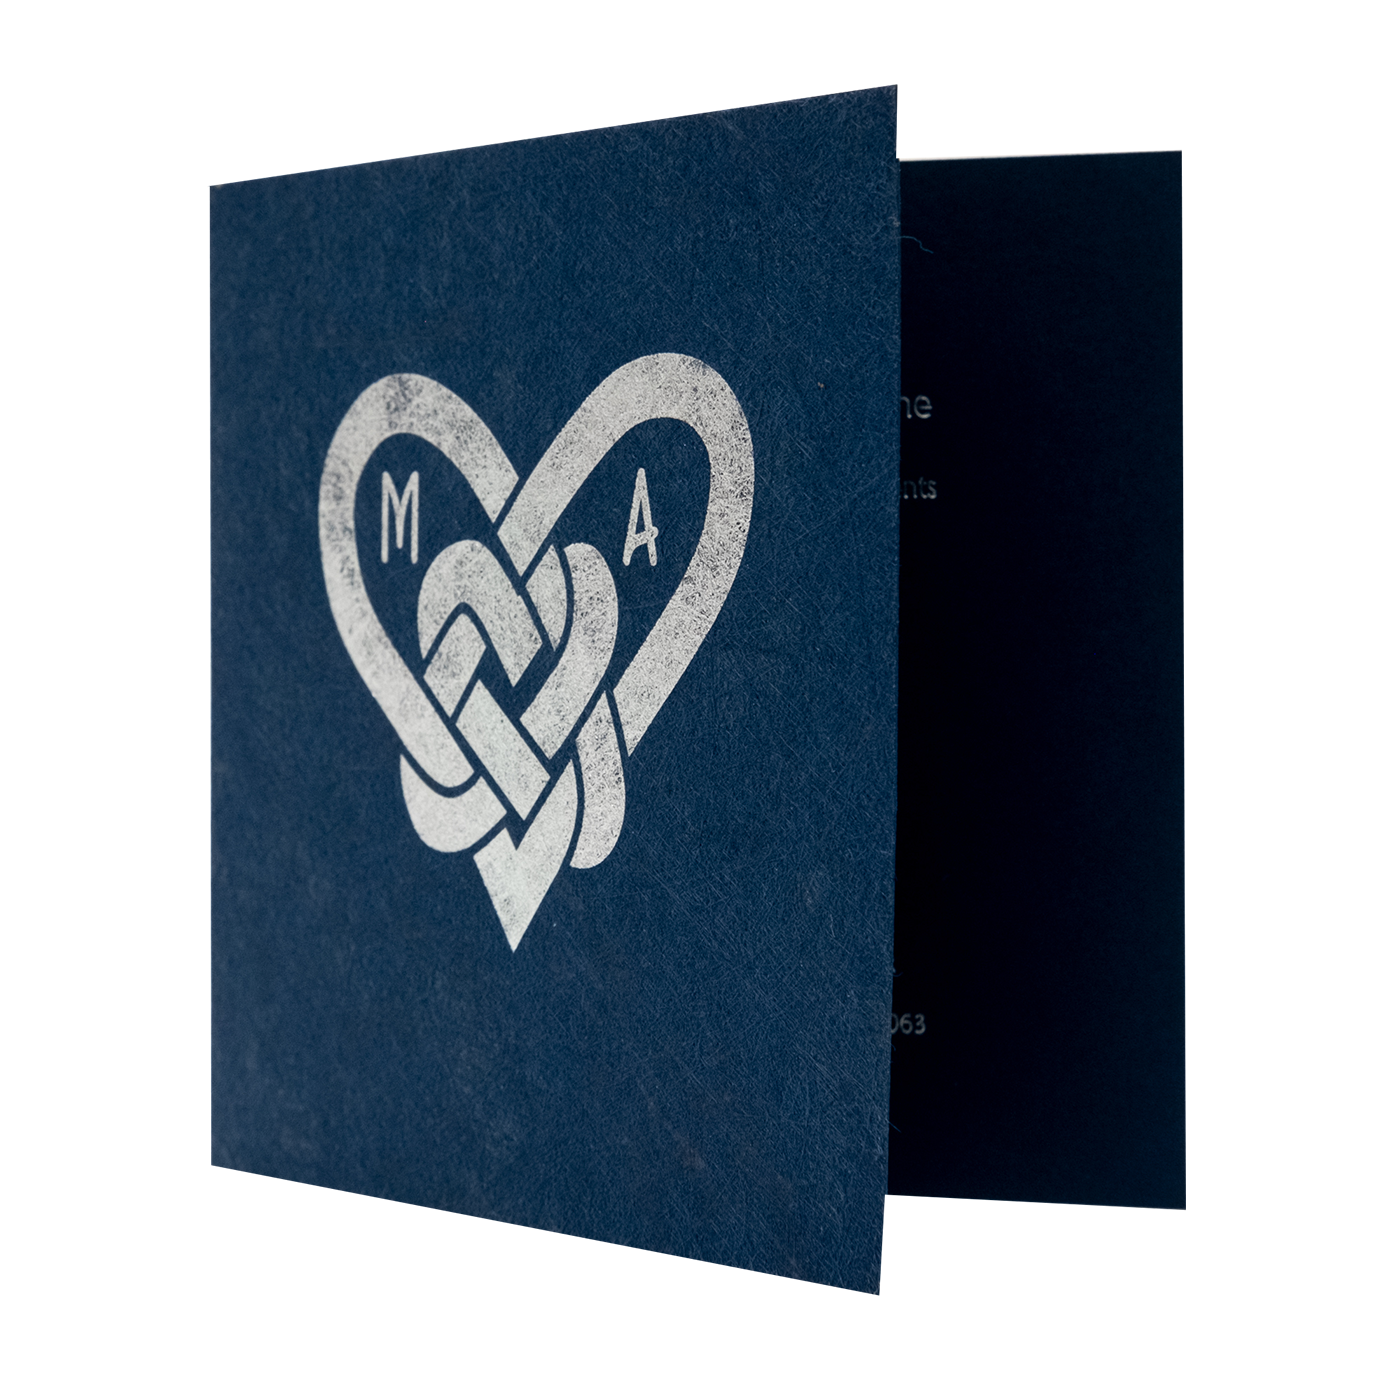 custom printed invitation onto blue card with silver foiling effects to cover